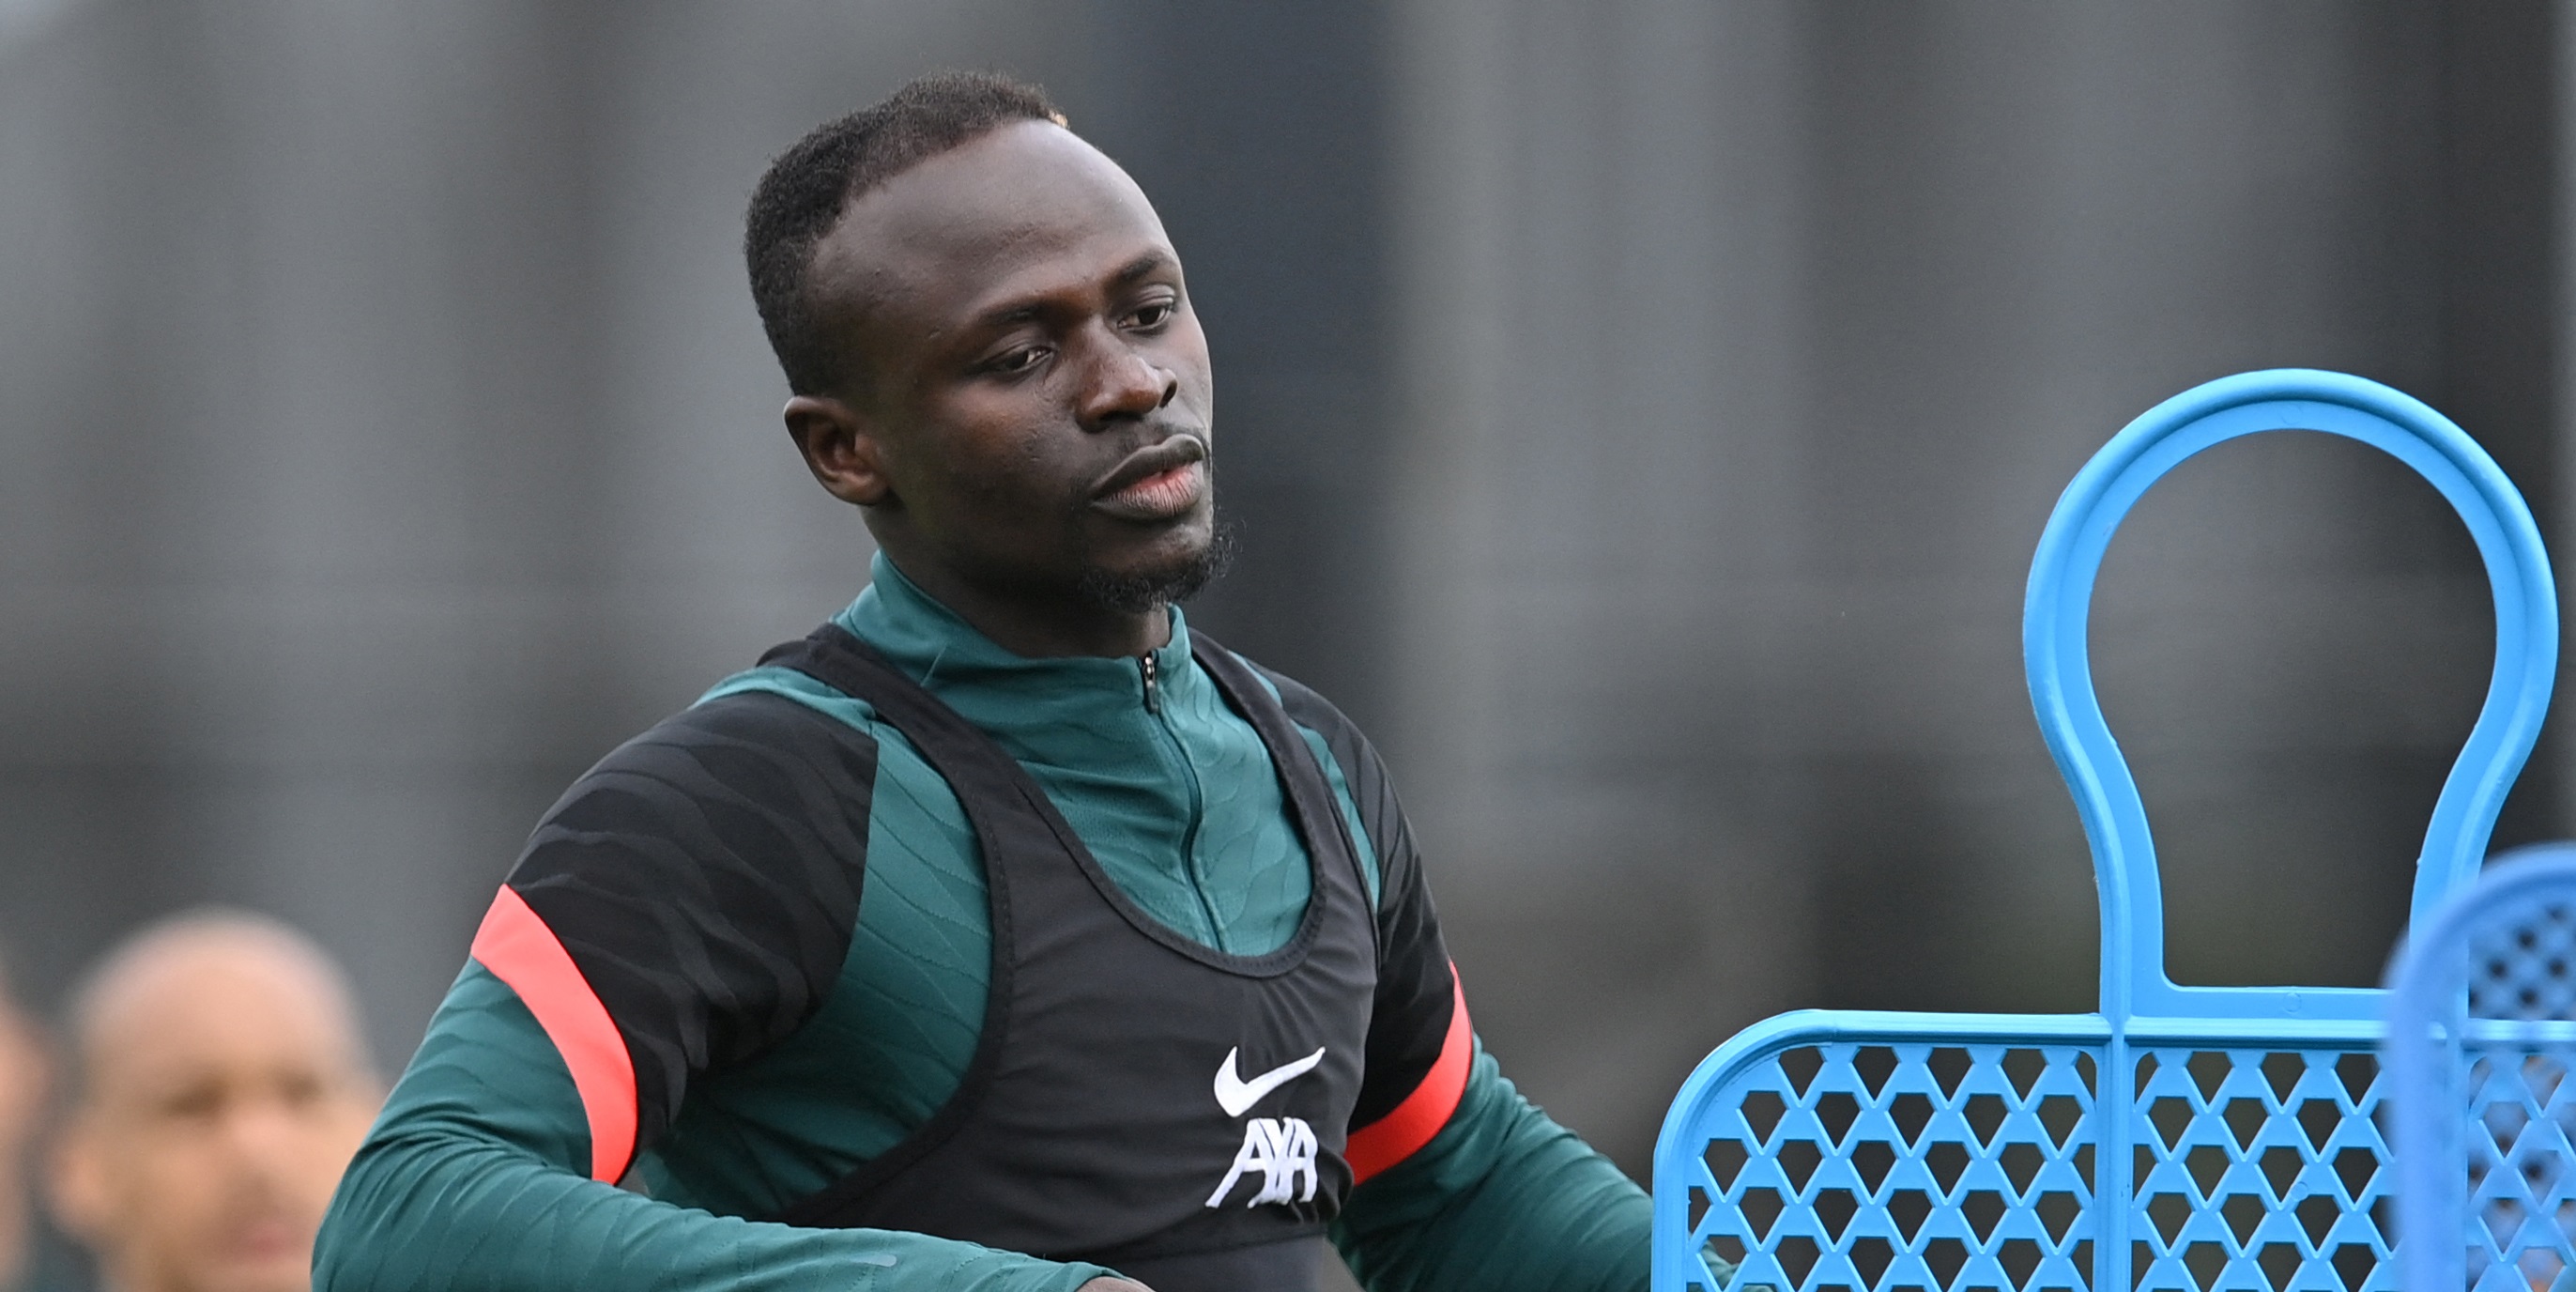 Liverpool could end Bayern’s interest in Sadio Mane after journalist drops fresh transfer update